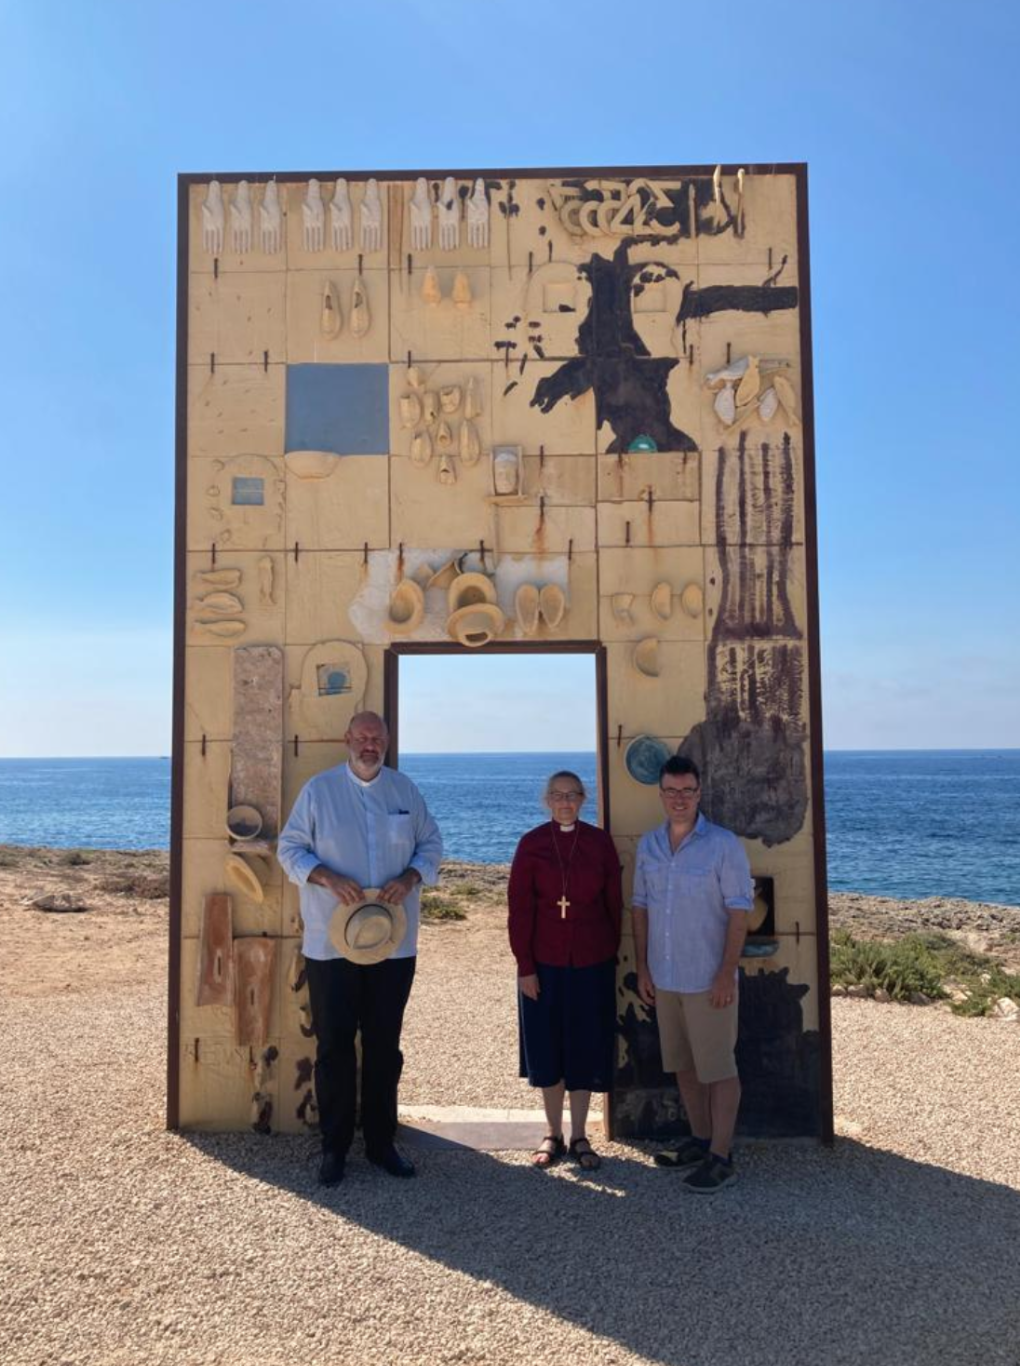 Three people standing in front of a sculpture at the beach.